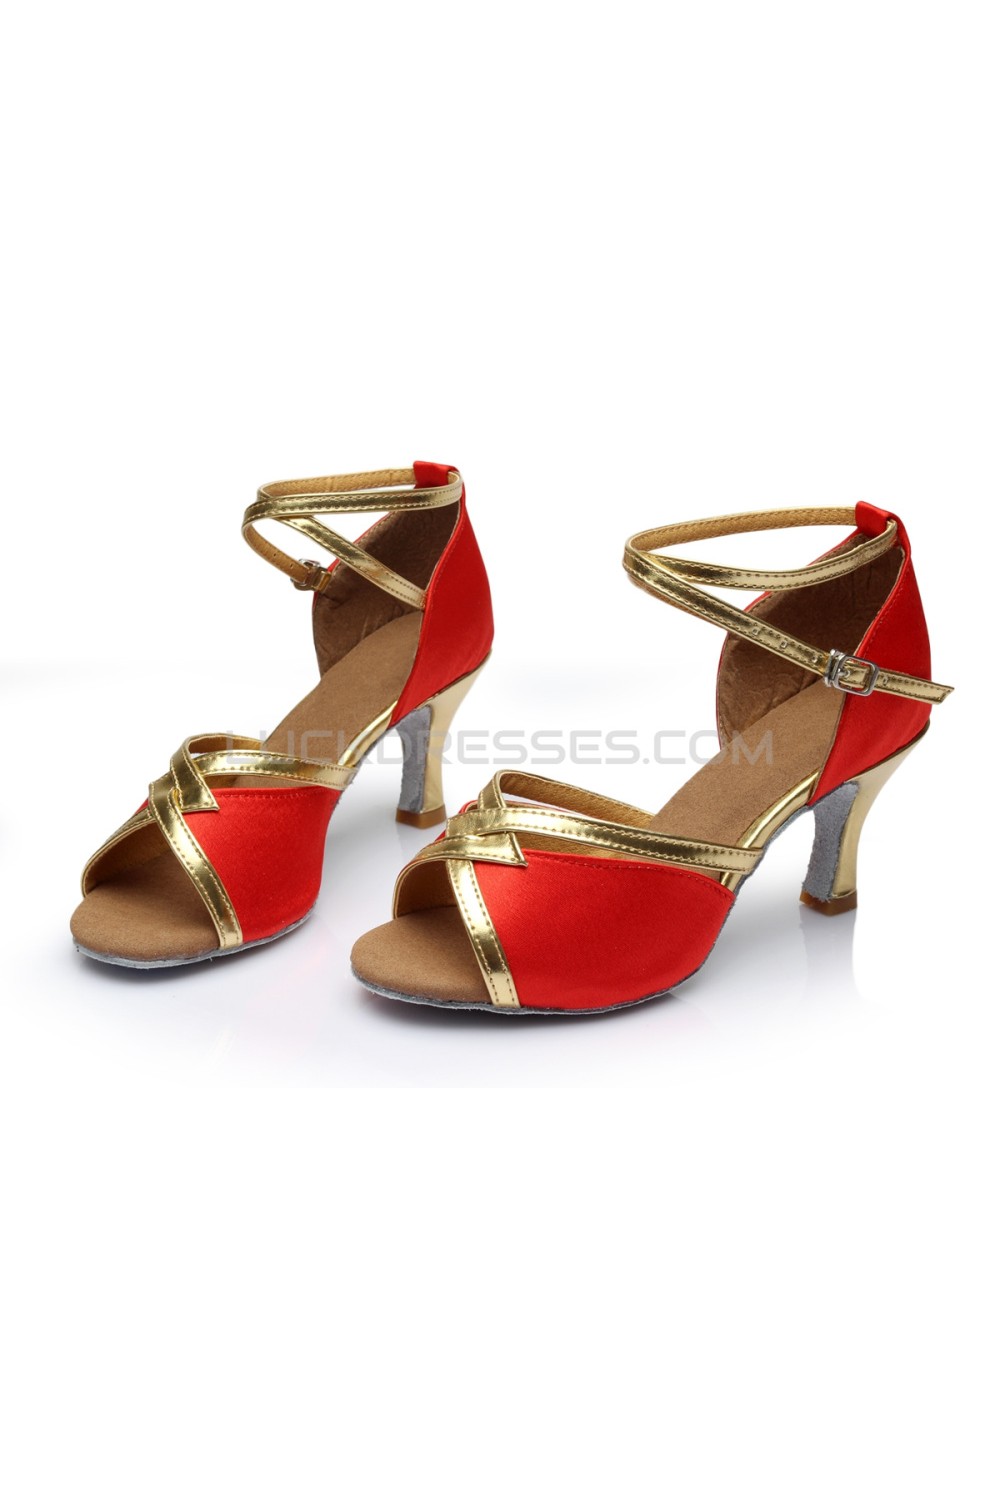 Women's Red Satin Heels Sandals Latin Salsa With Ankle Strap Dance ...